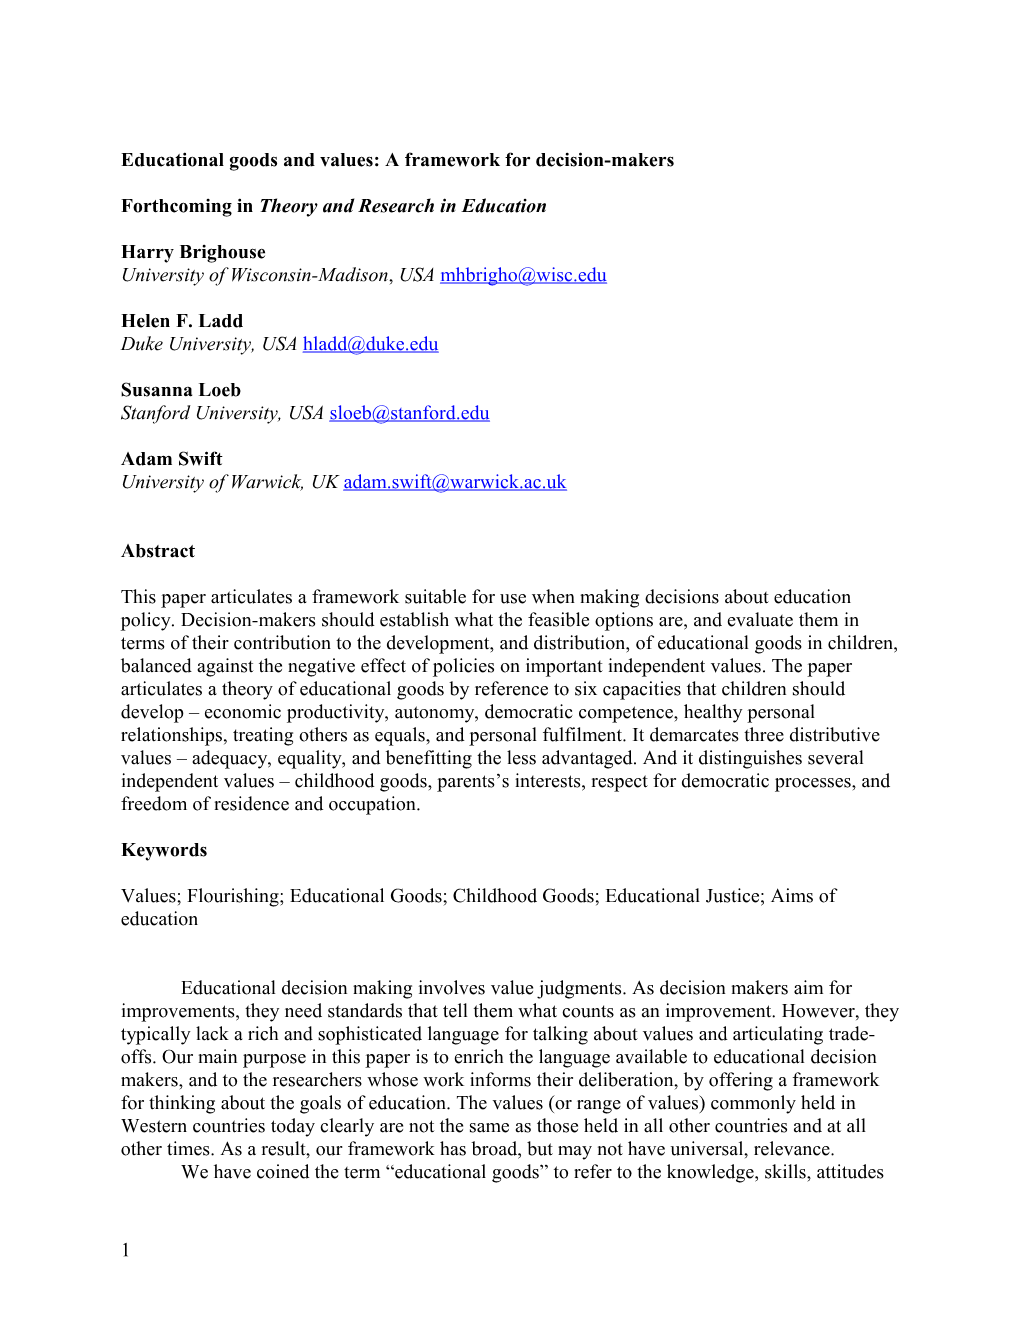 Forthcoming in Theory and Research in Education